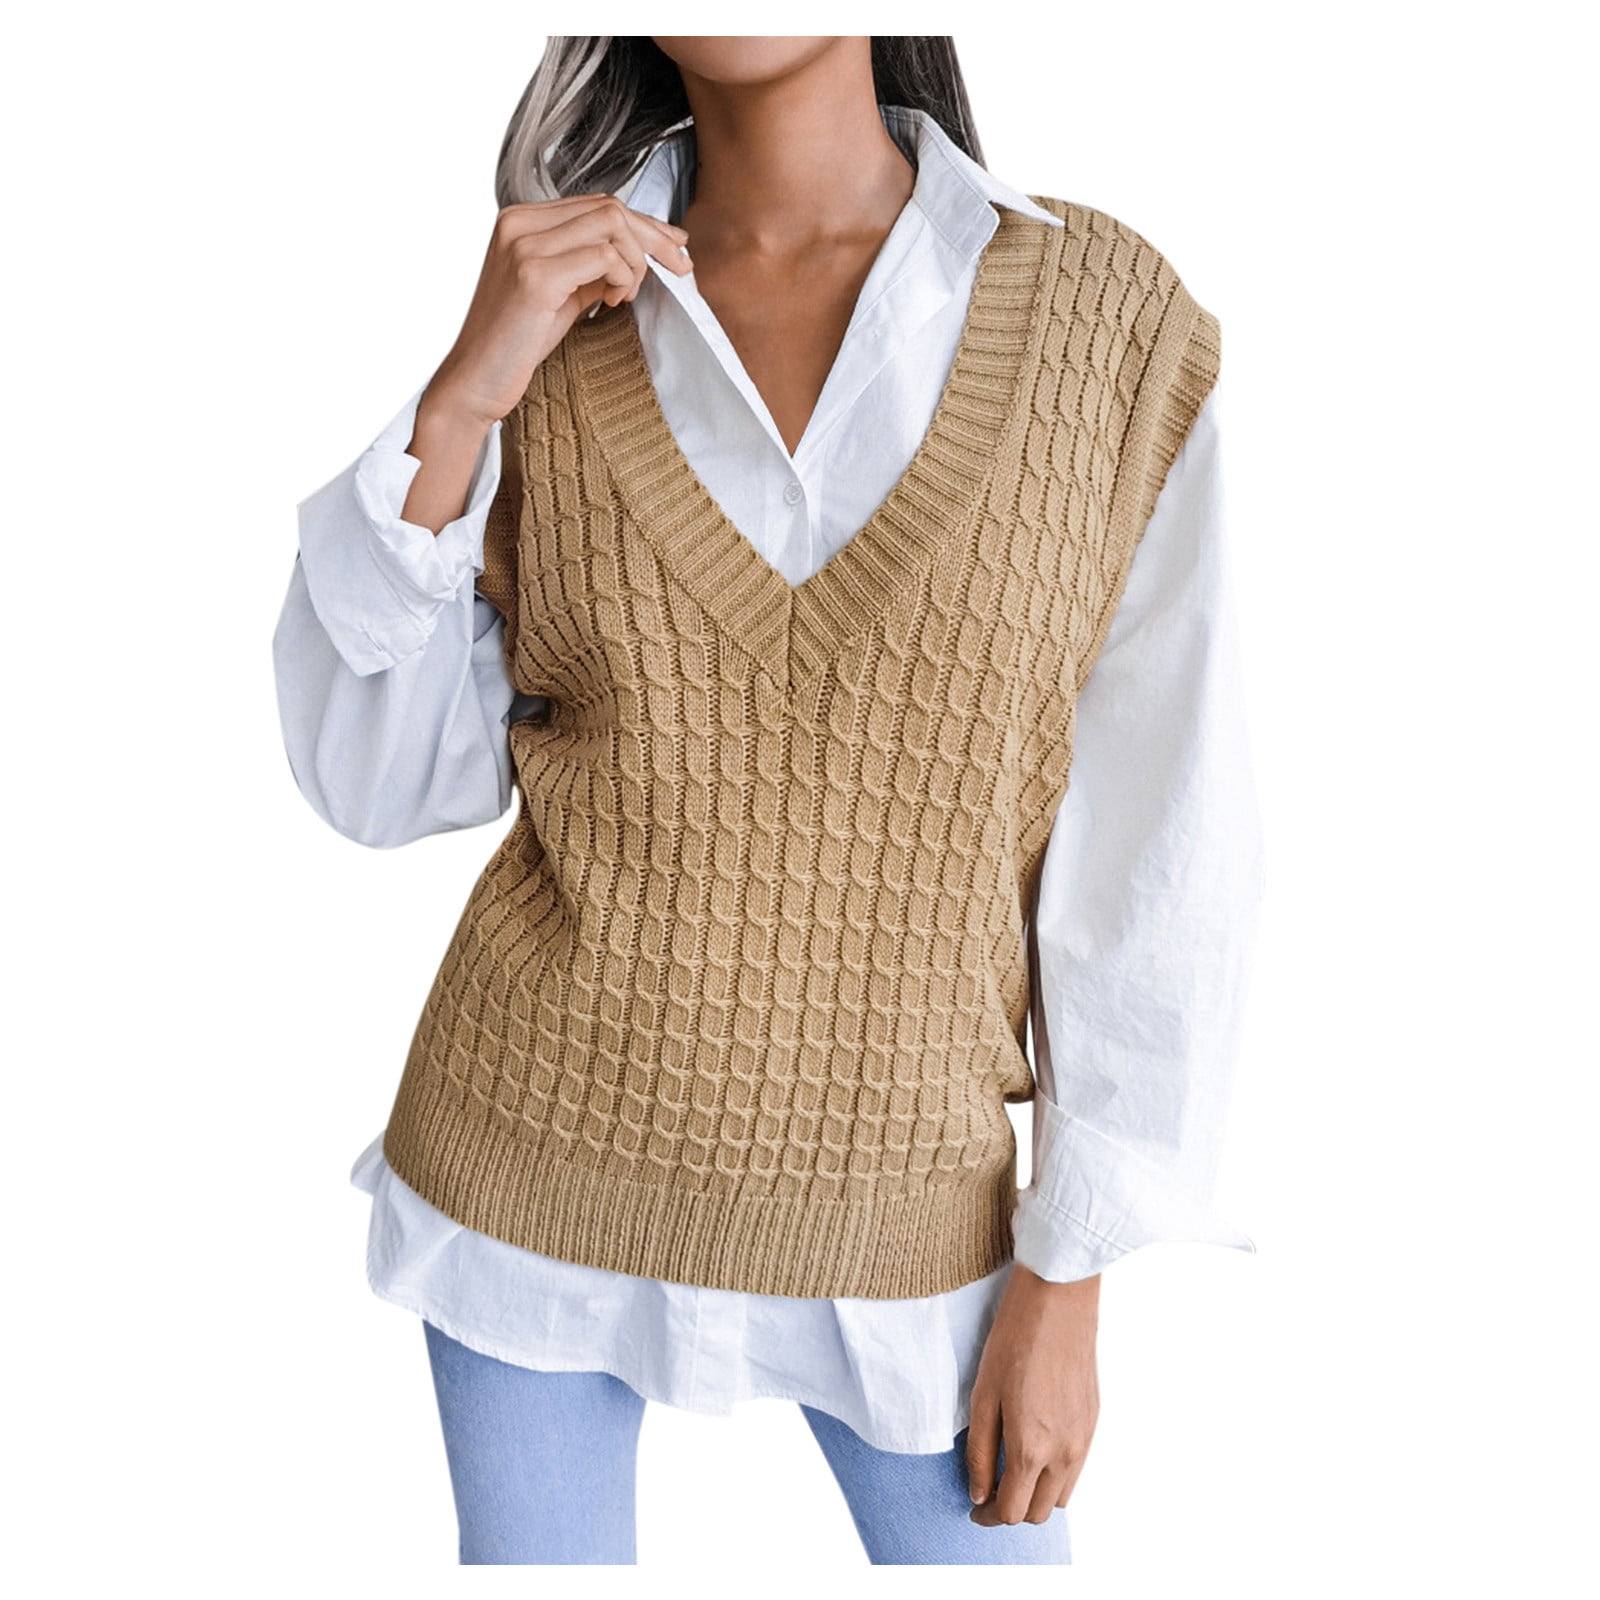 HSMQHJWE Soft Sweaters For Women Cozy Warm Women Cardigan Sweater Women'S  Autumn And Winter Fasion Solid Color V-Neck Sweater Vest Cable Knitted  Sleeveless Checked Sweater Tan Sweater 